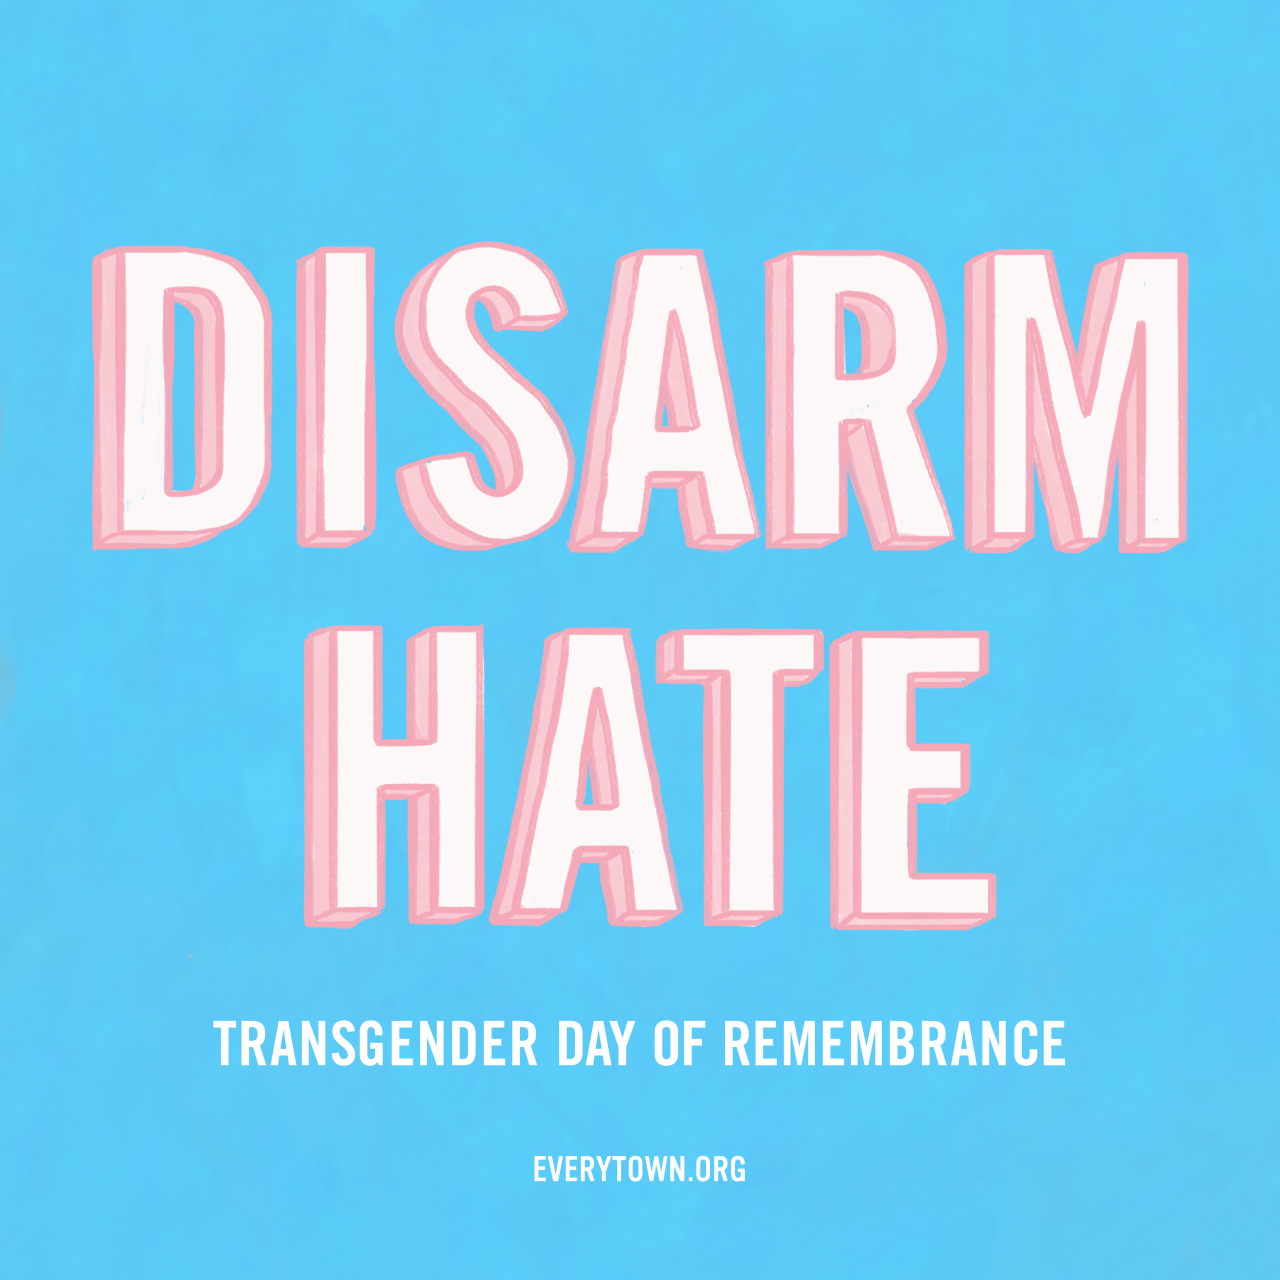 At least 22 trans Americans have been killed in 2019, at least 17 of whom were fatally shot. Nearly every victim was a Black woman.
On Transgender Day of Remembrance, we remember their lives and fight to #DisarmHate so transgender people can feel...